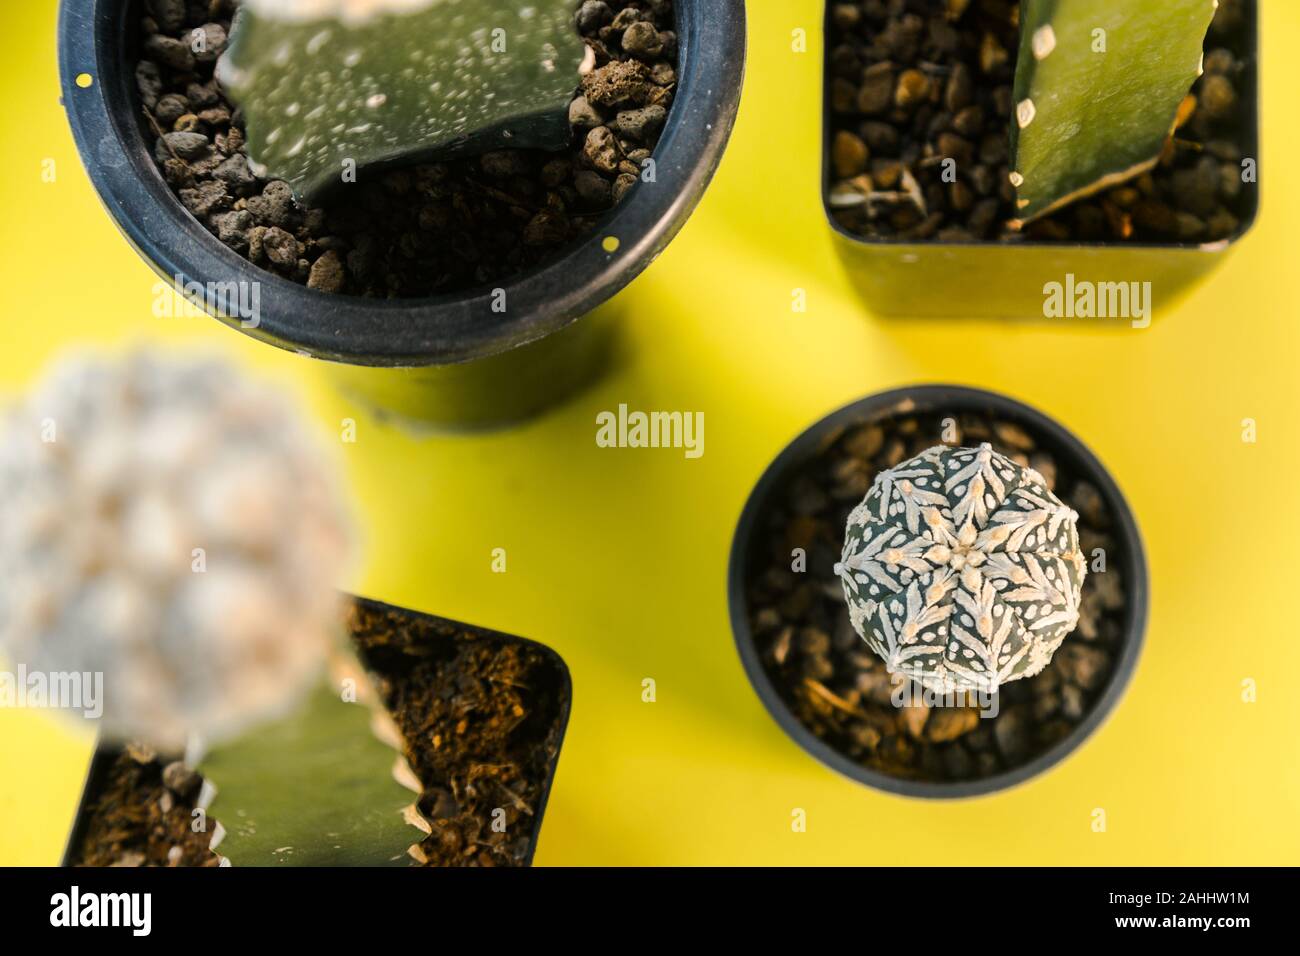 White V cactus in pot put on yellow scene with another type of cactus Stock Photo